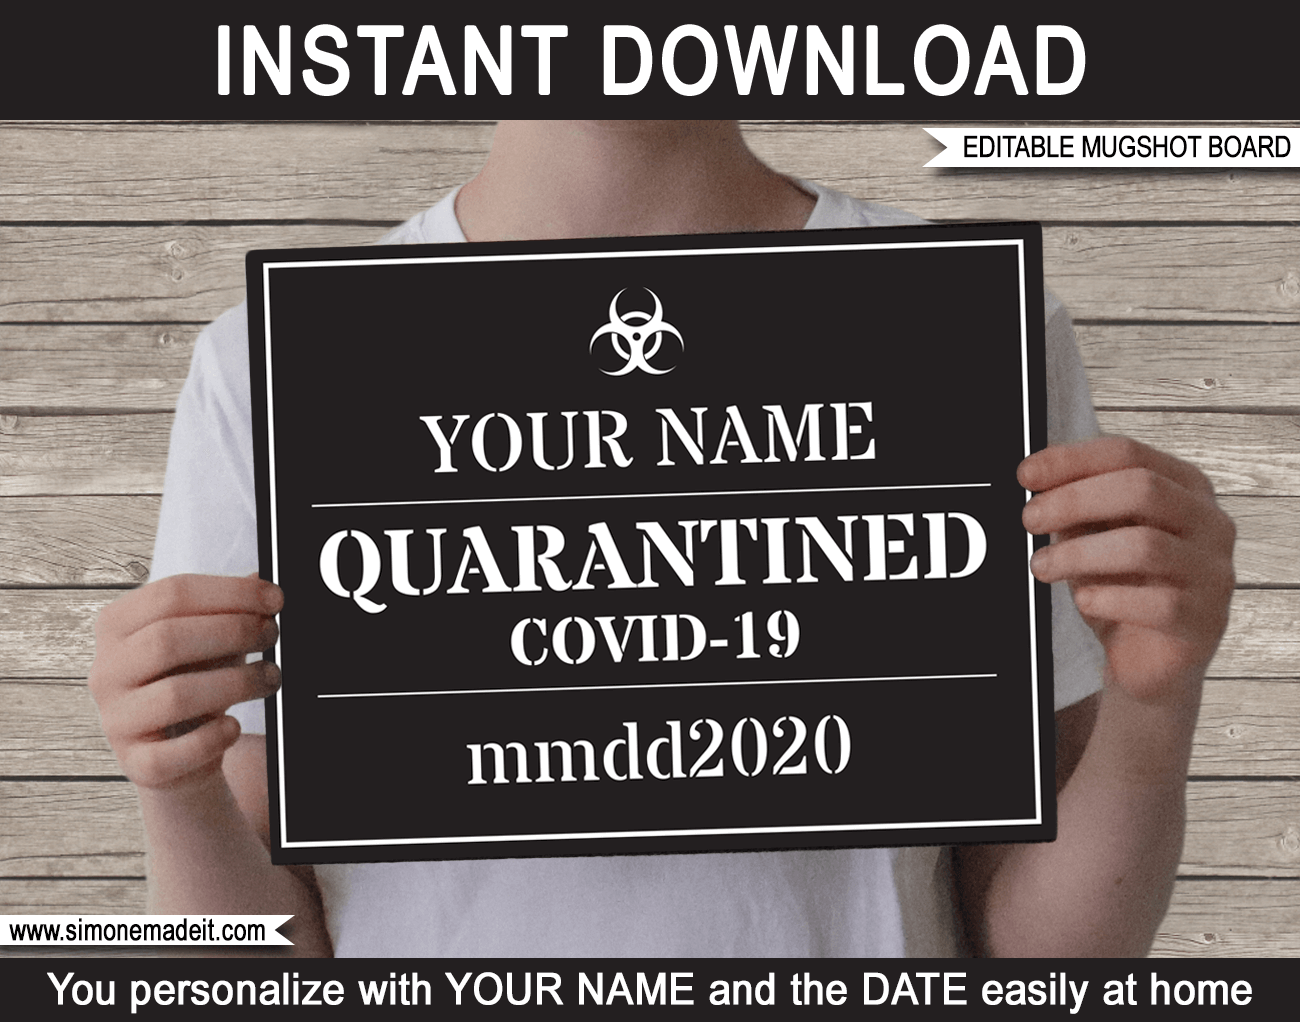 Quarantine Mugshot Sign Board Printable Template | Photo Prop | Covid-19, Novel Coronavirus | Lockdown, Self Isolation, Stay at Home Notice, Shelter in Place | Senior 2020, Virtual Birthday Party | INSTANT DOWNLOAD with Editable Text via simonemadeit.com